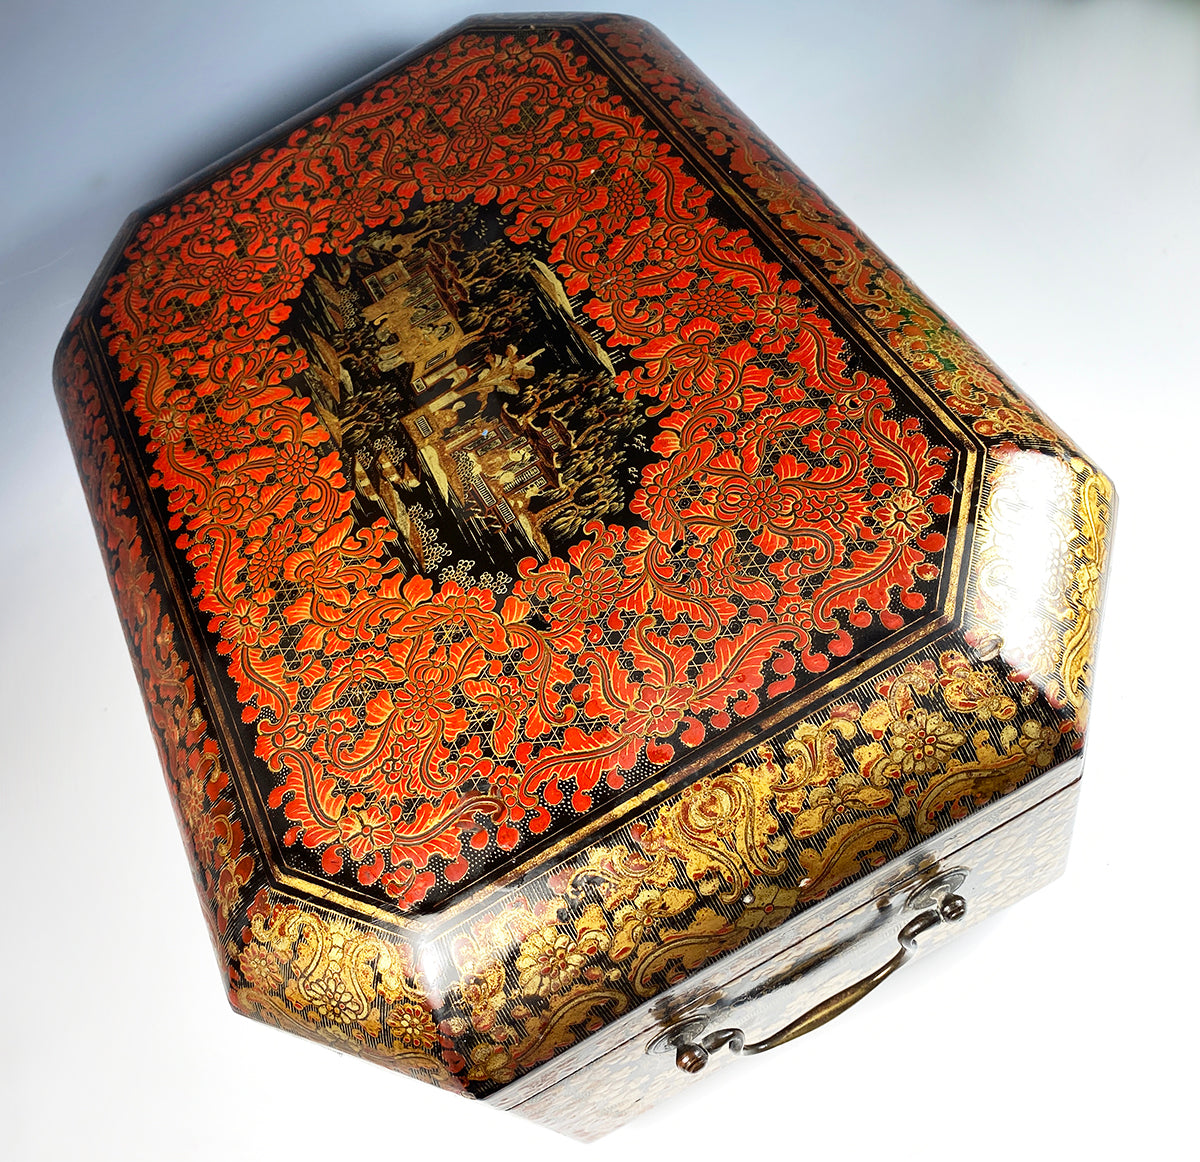 Fine Antique Chinese Lacquer 14.25" Sewing Box, Tools, Writer's Slop Desk Drawer - Victorian Era Asian Compendium